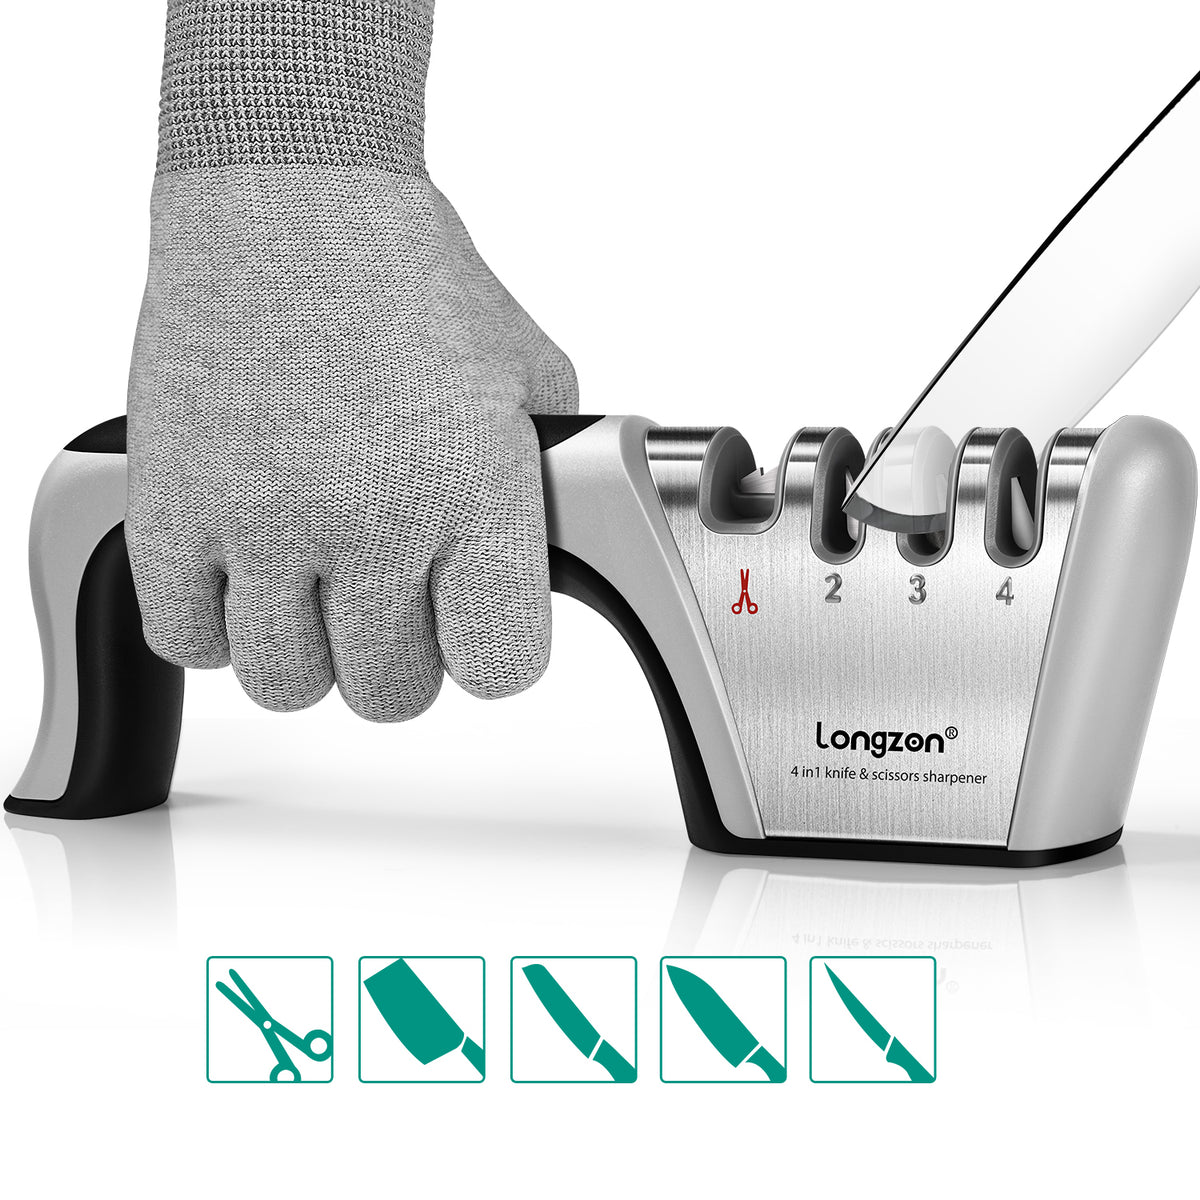 4-in-1 longzon [4 stage] Knife Sharpener - Used, Good Condition